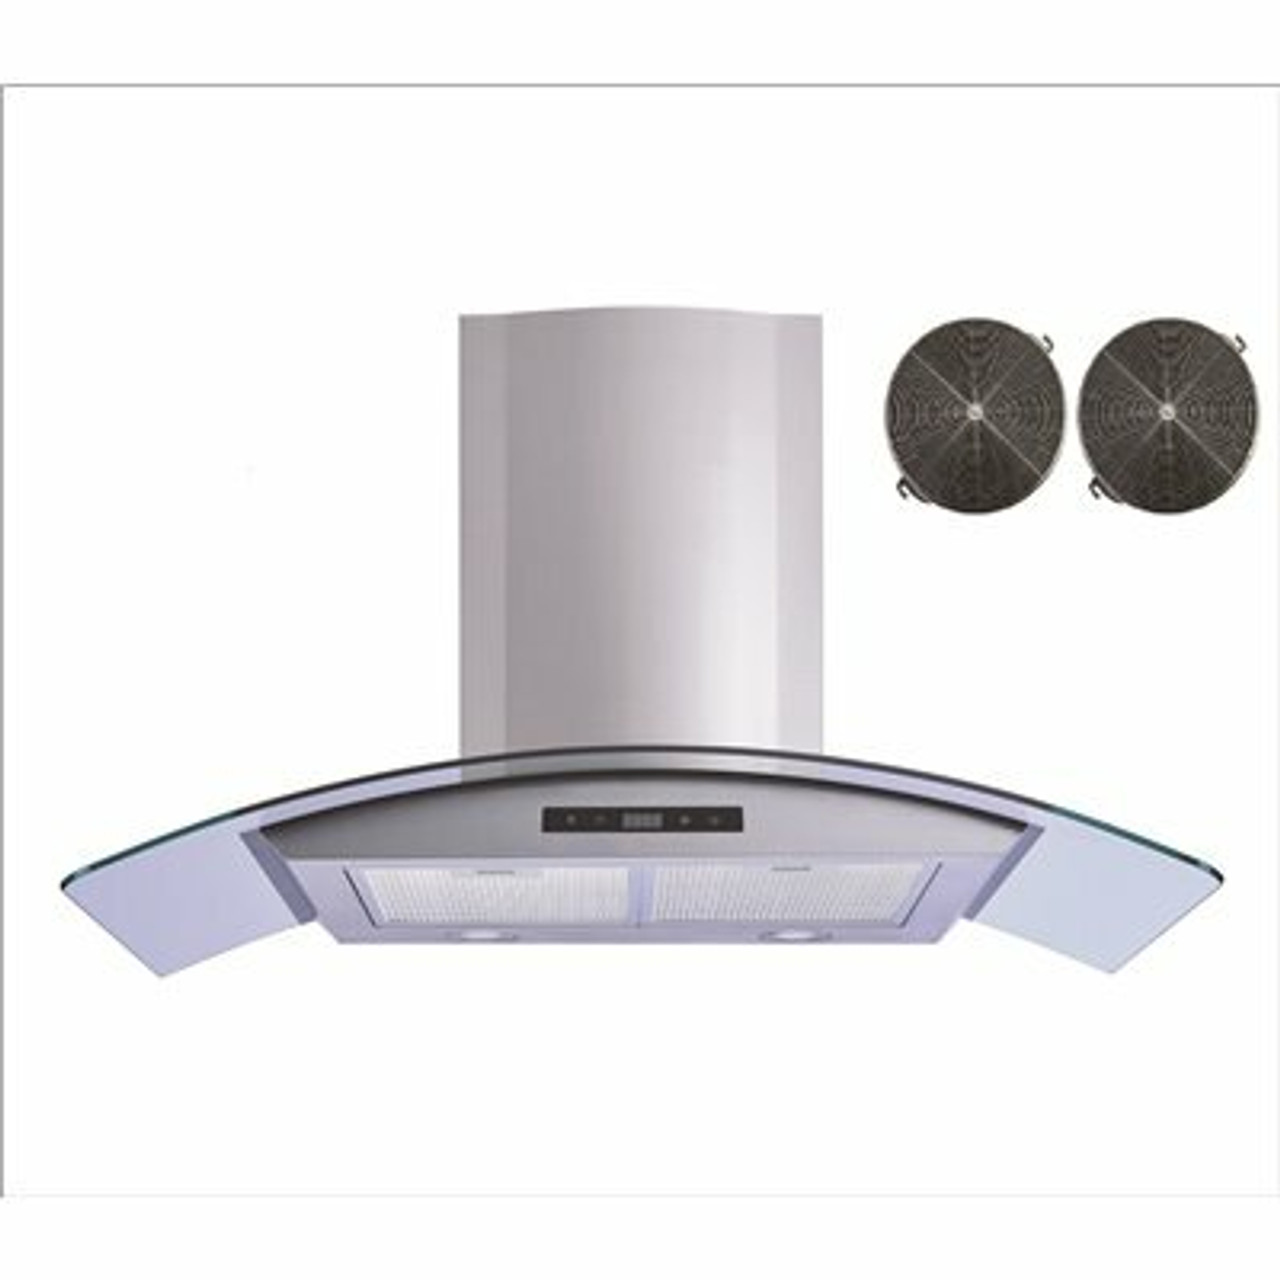 30 In. 520 Cfm Convertible Stainless Steel/Glass Wall Mount Range Hood With Mesh And Charcoal Filters And Touch Control